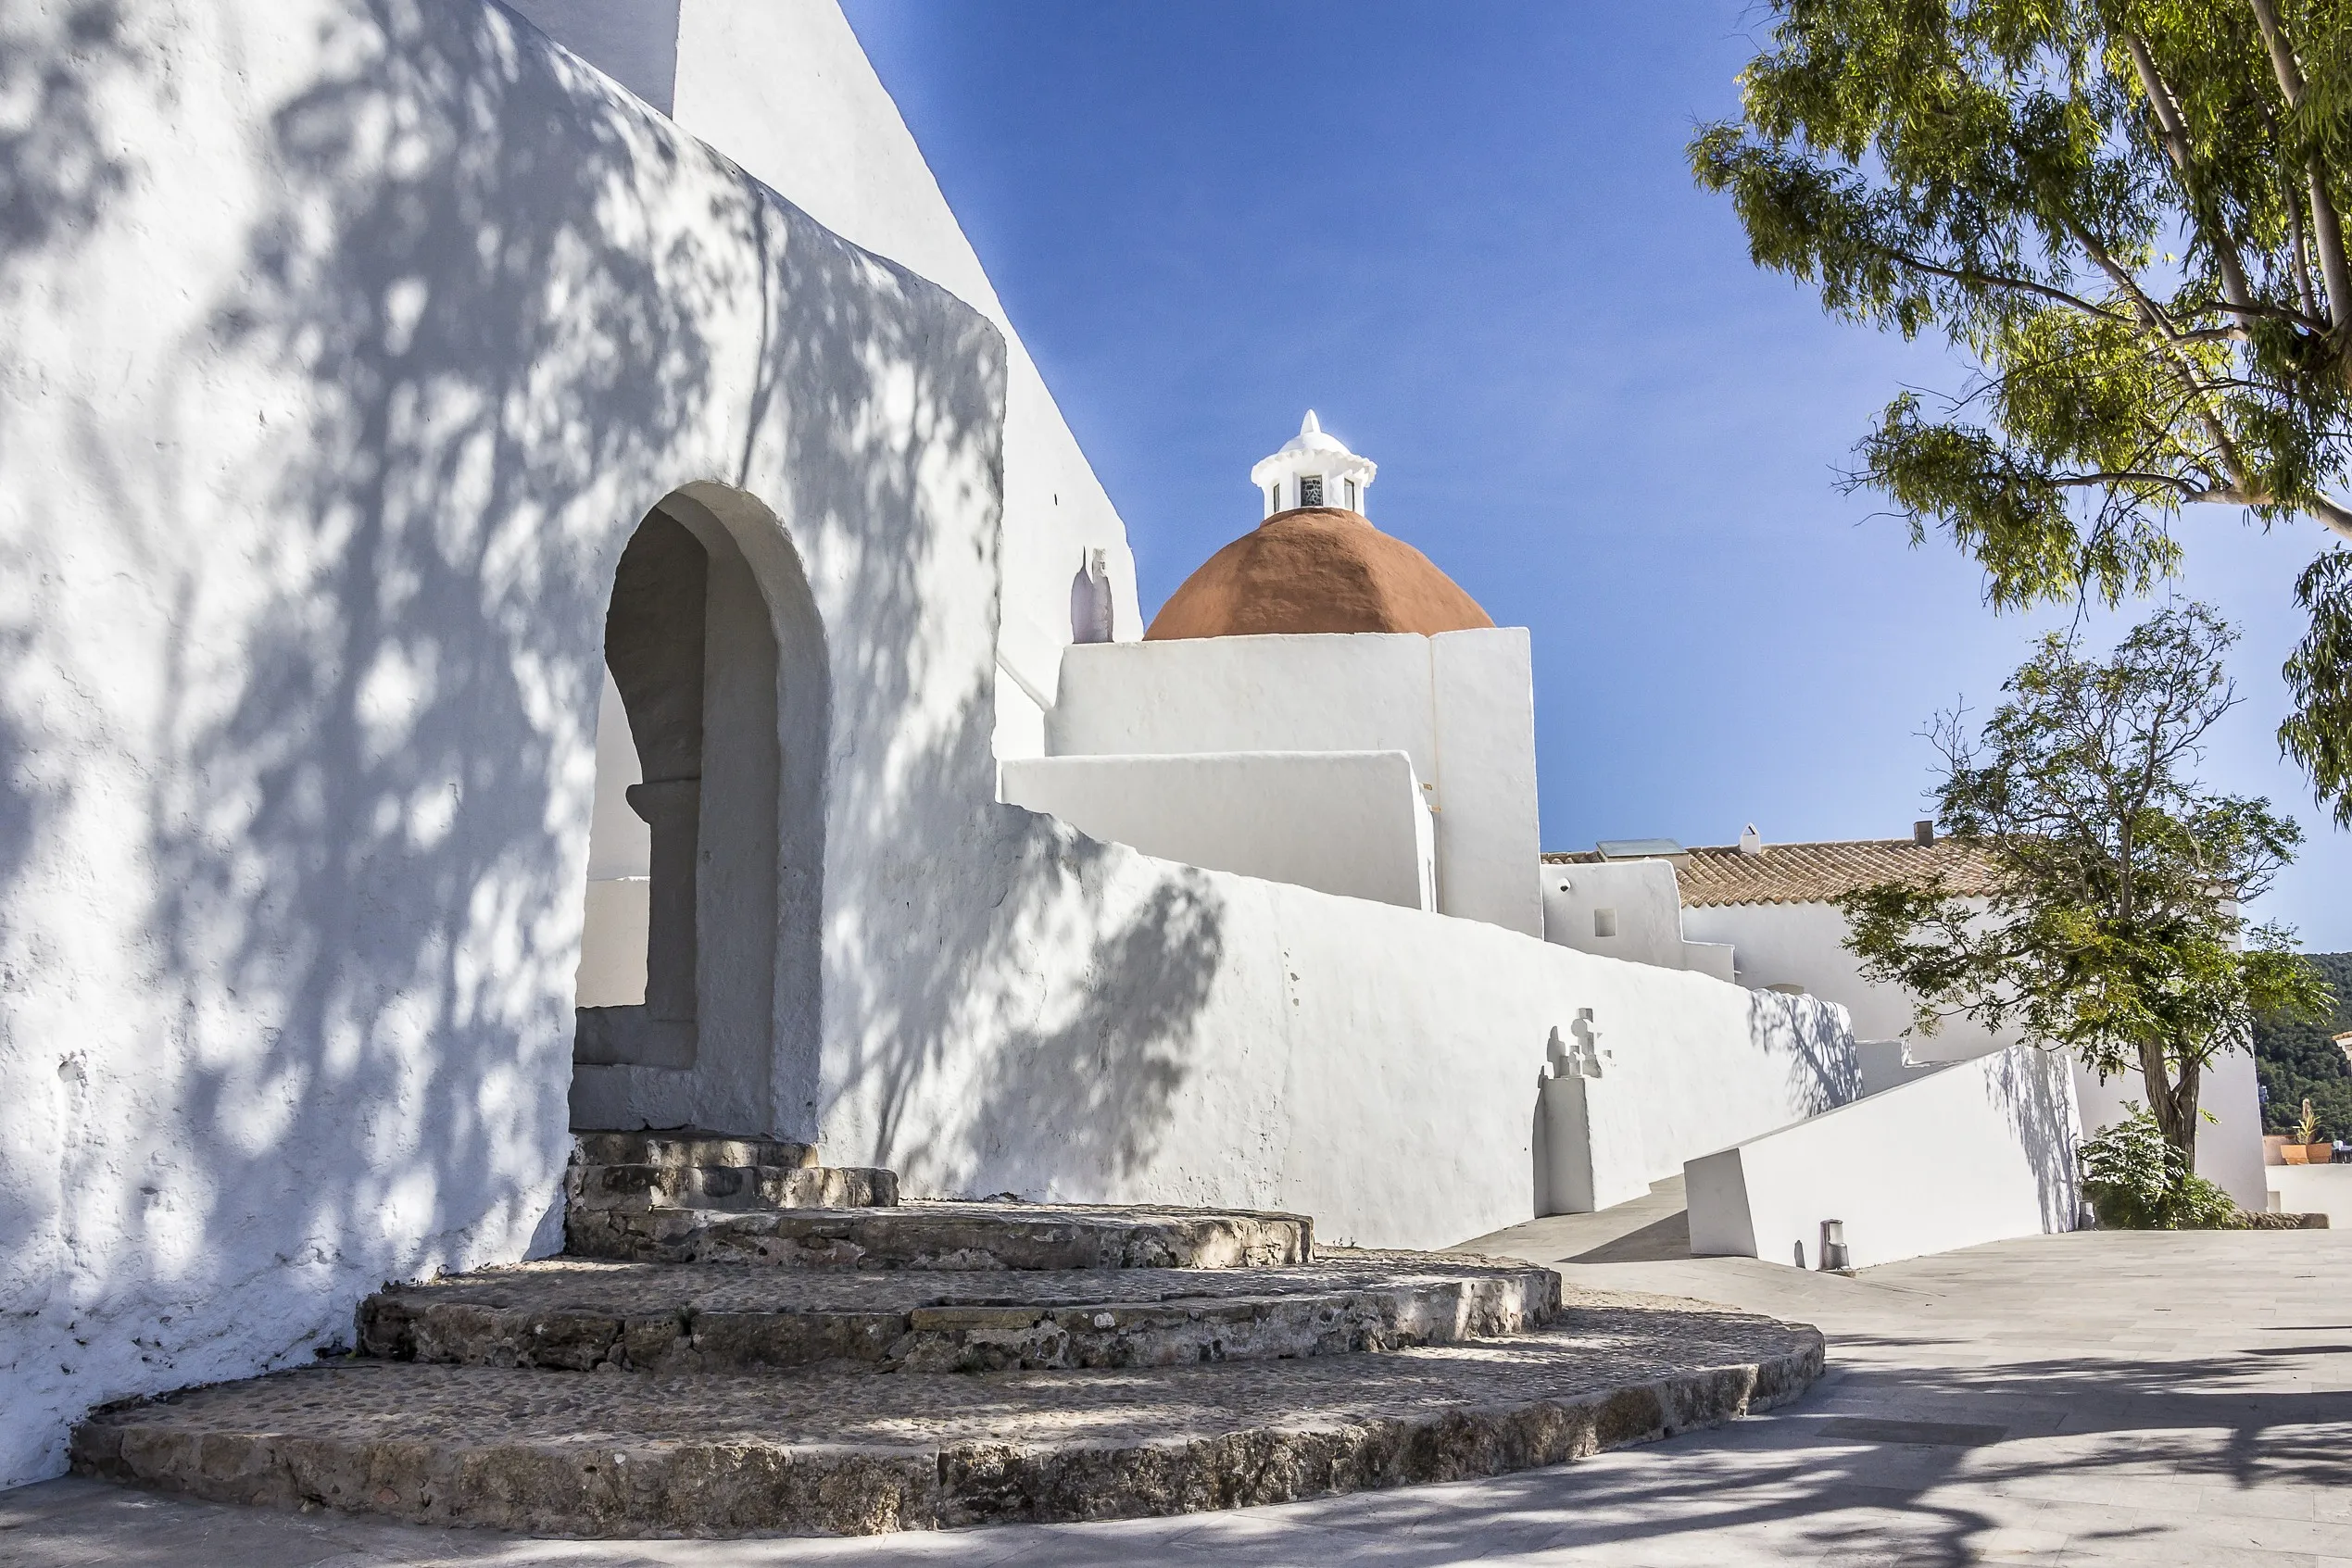 Puig de Missa Church in Spain, Europe | Architecture - Rated 3.6